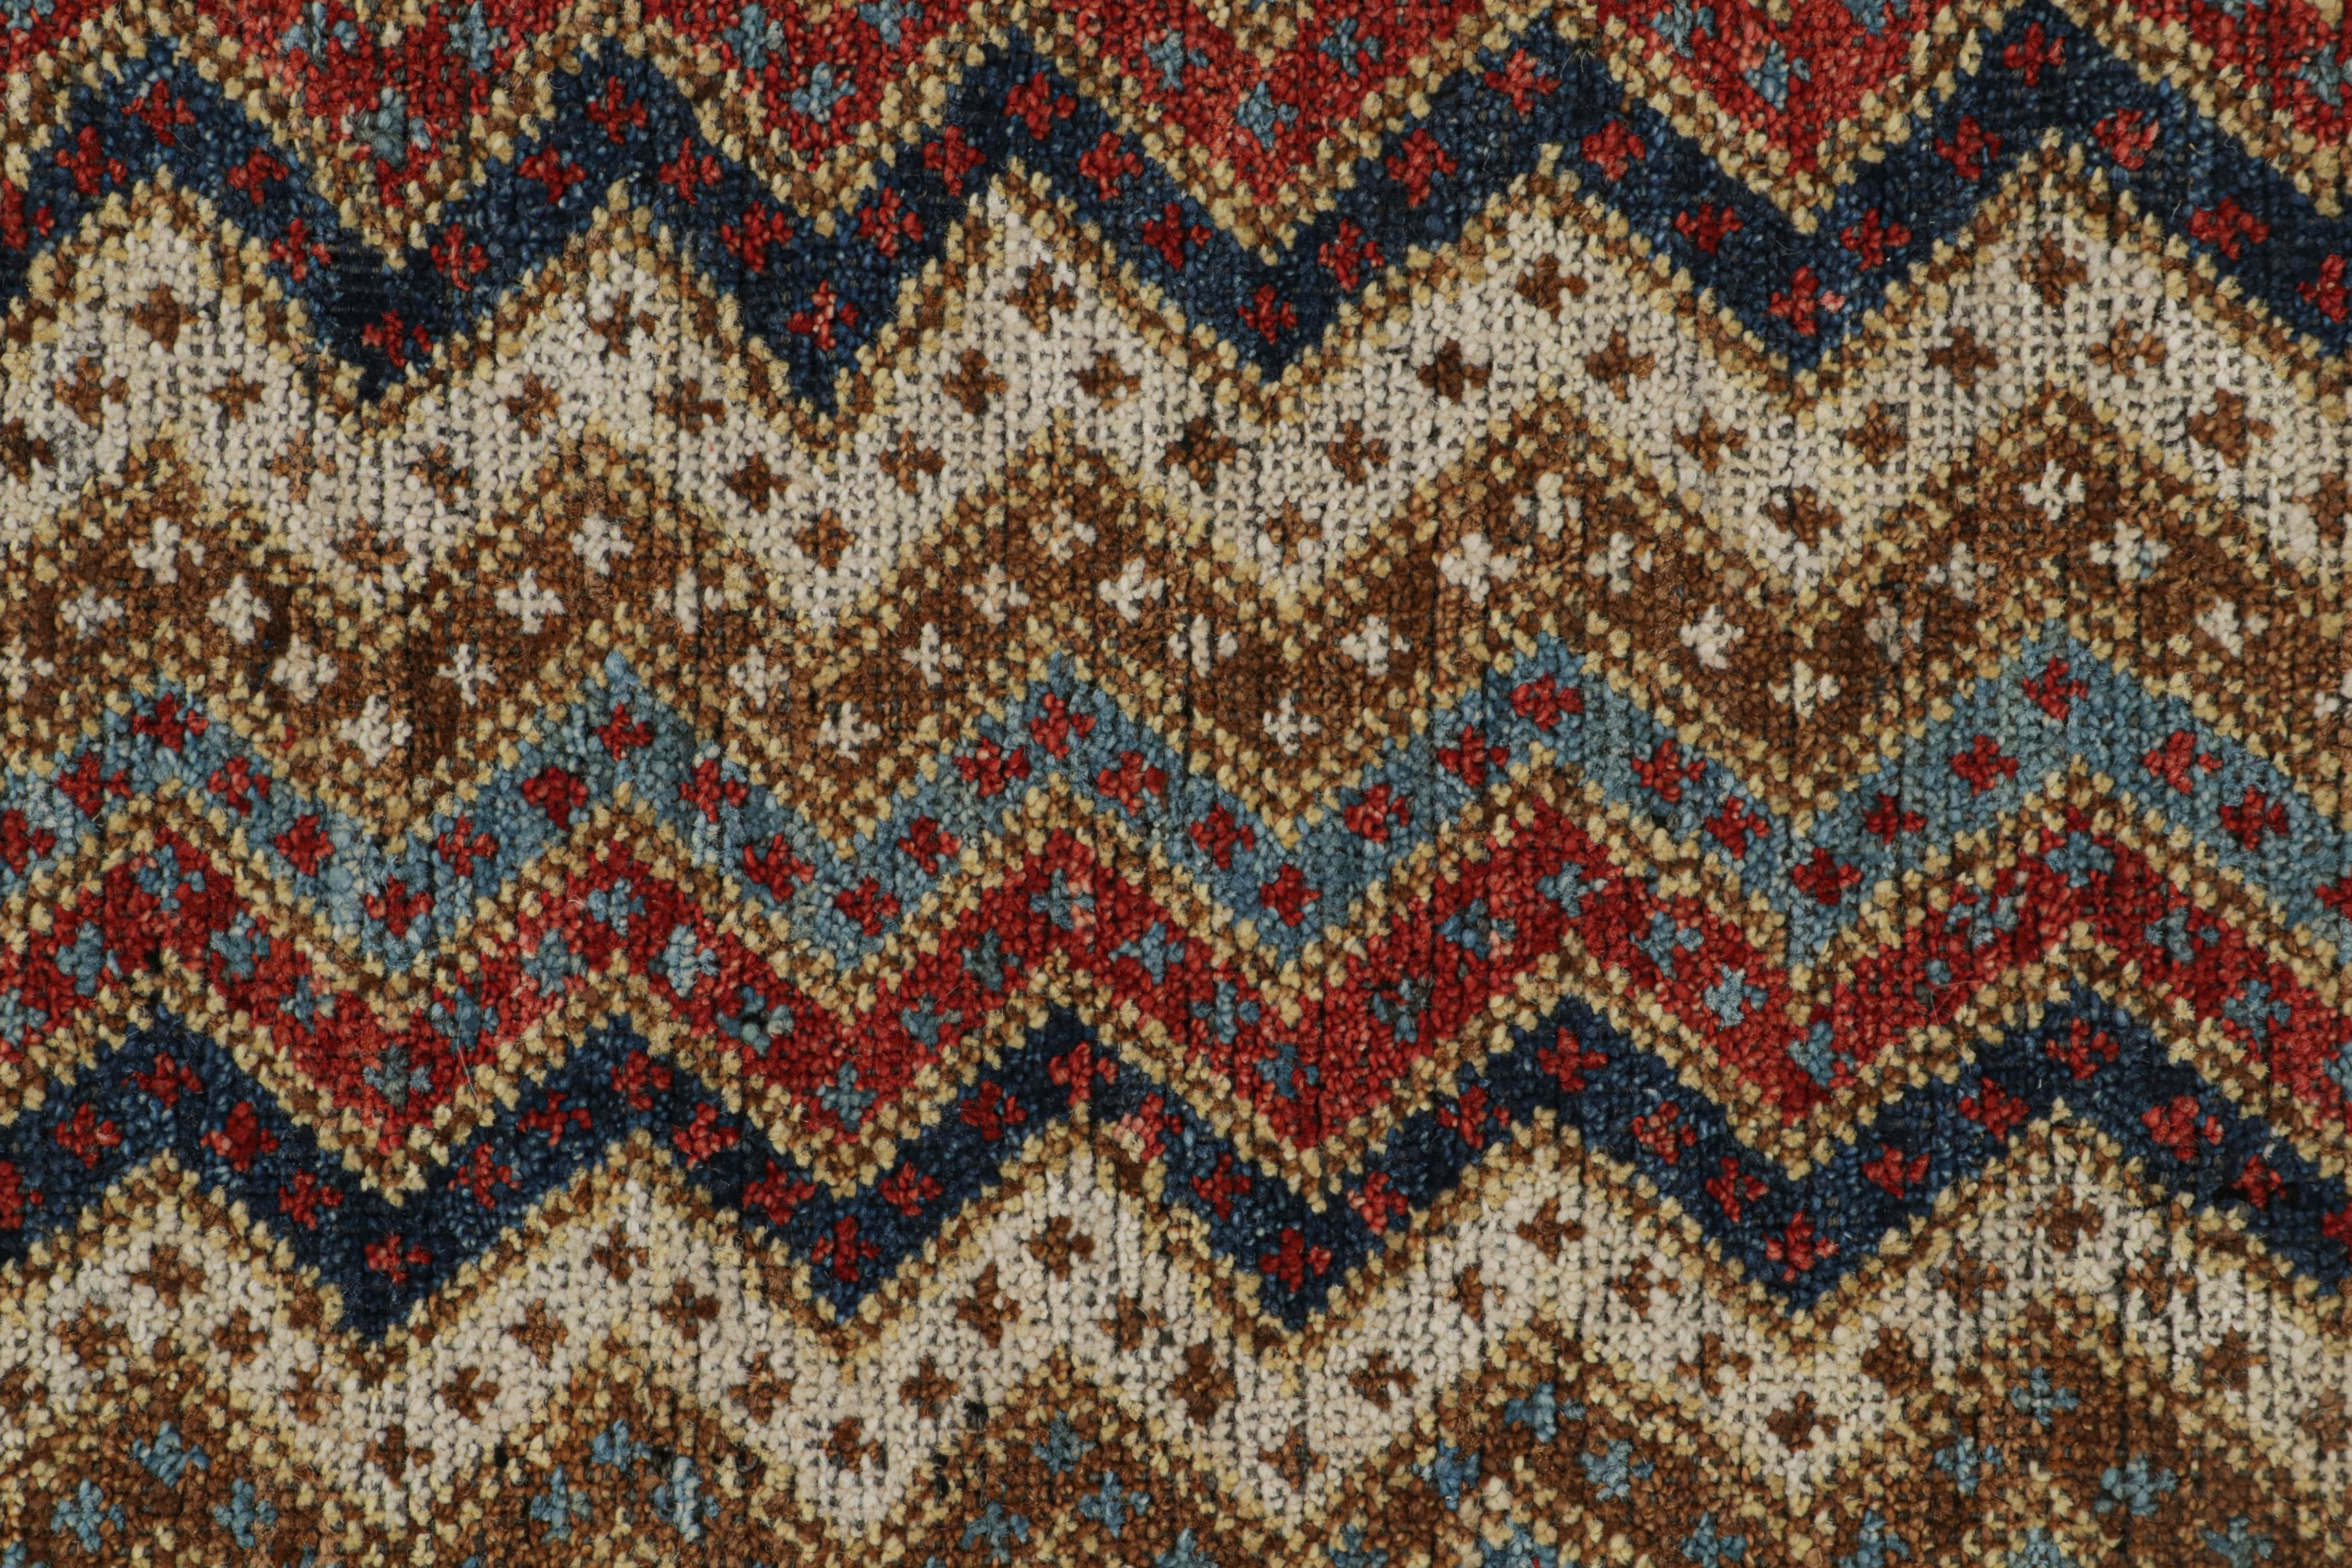 Rug & Kilim’s Antique Tribal Style Rug in Red, Blue and Beige-Brown Chevrons In New Condition For Sale In Long Island City, NY